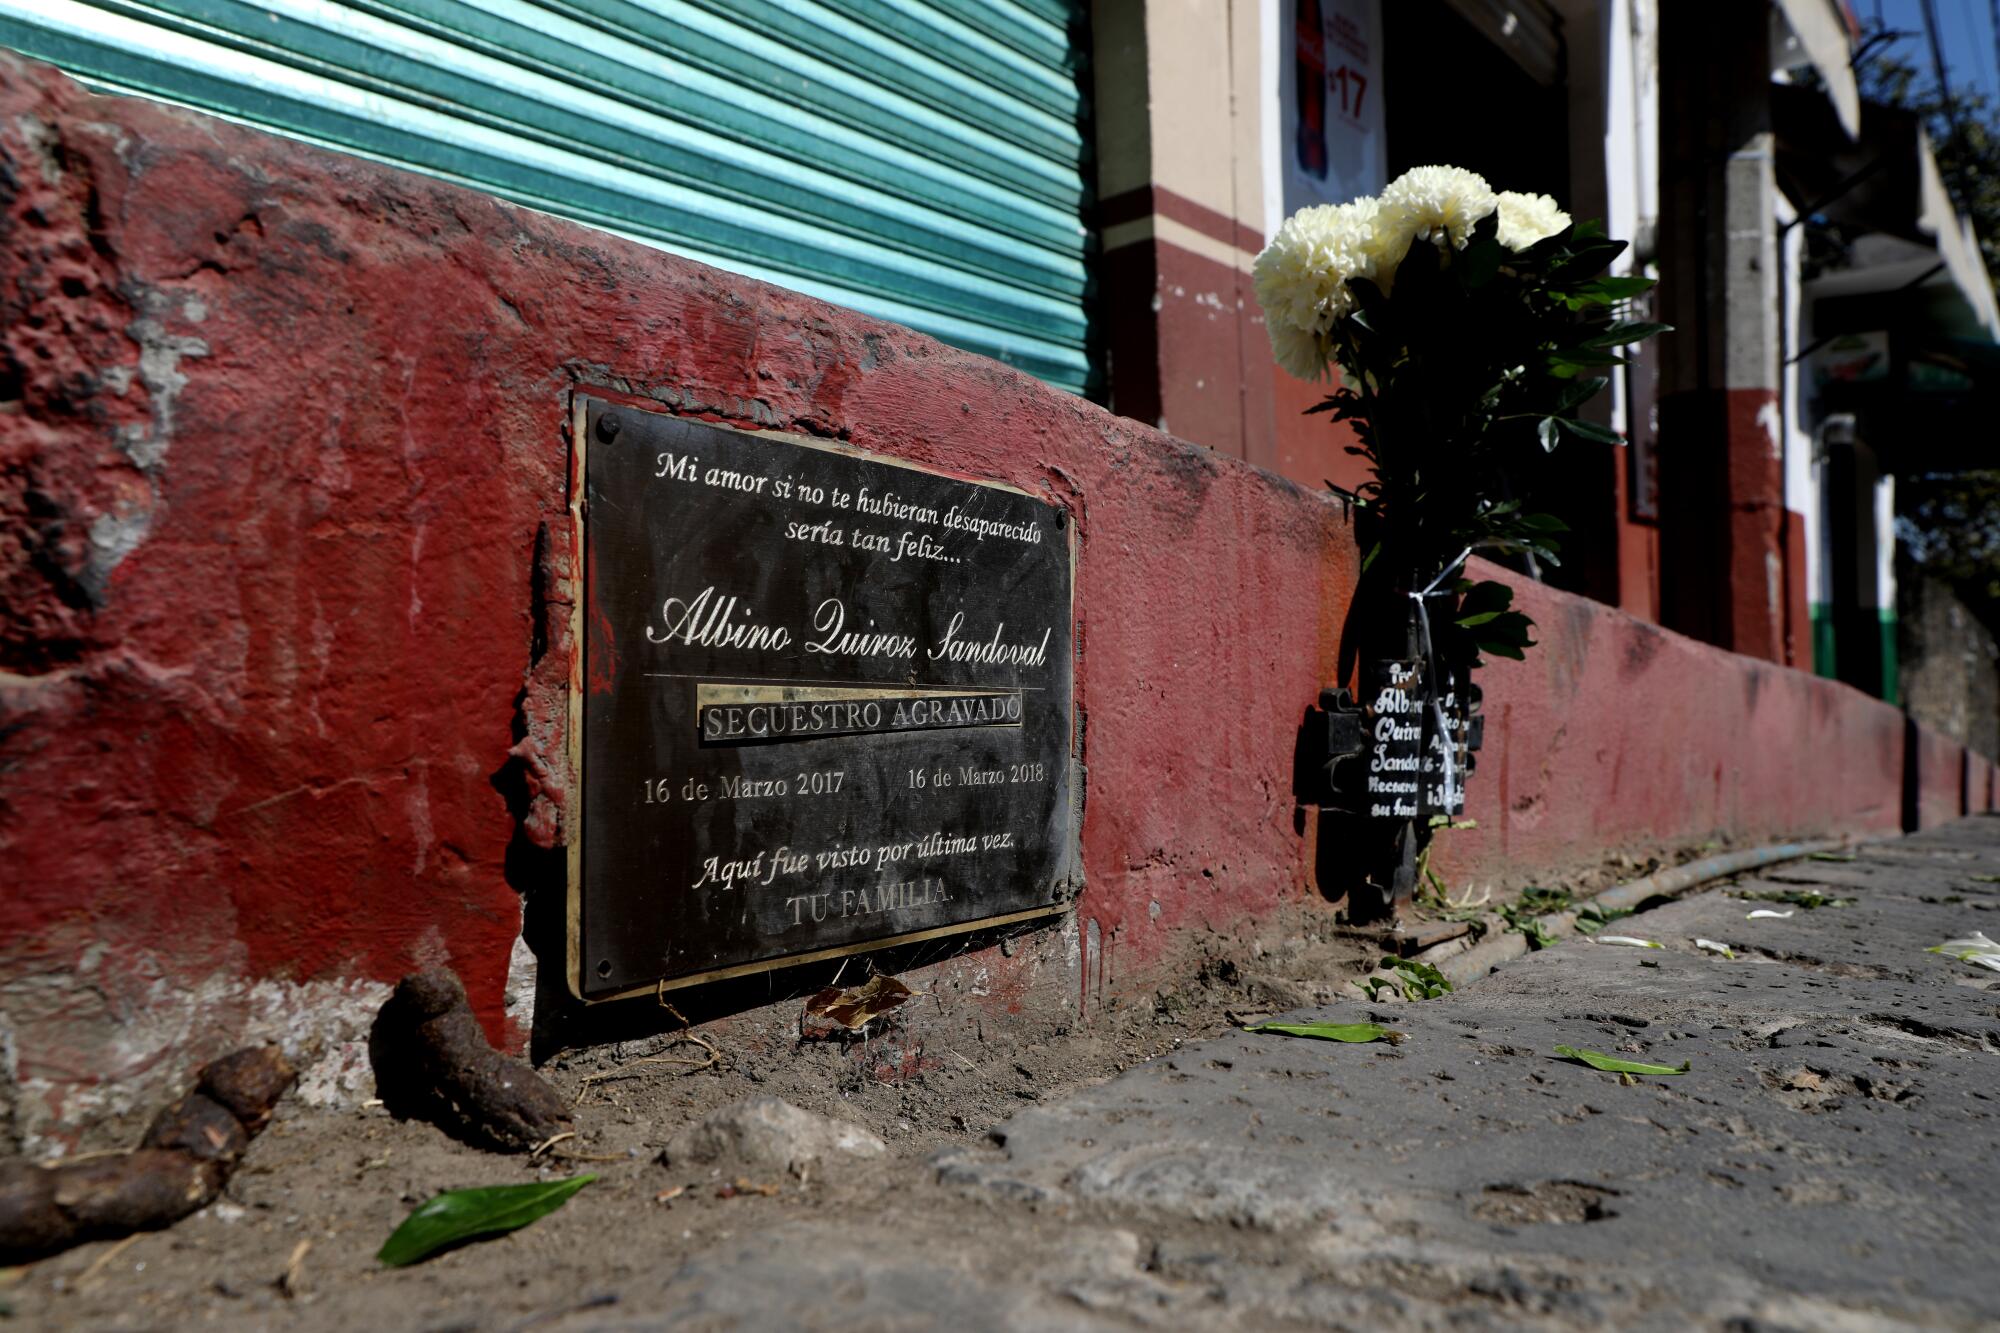 A marker inscribed with "aggravated kidnapping and here was last seen," in honor of Albino Quiroz Sandoval, in downtown Tepoztlán, Mexico, on Dec. 15.